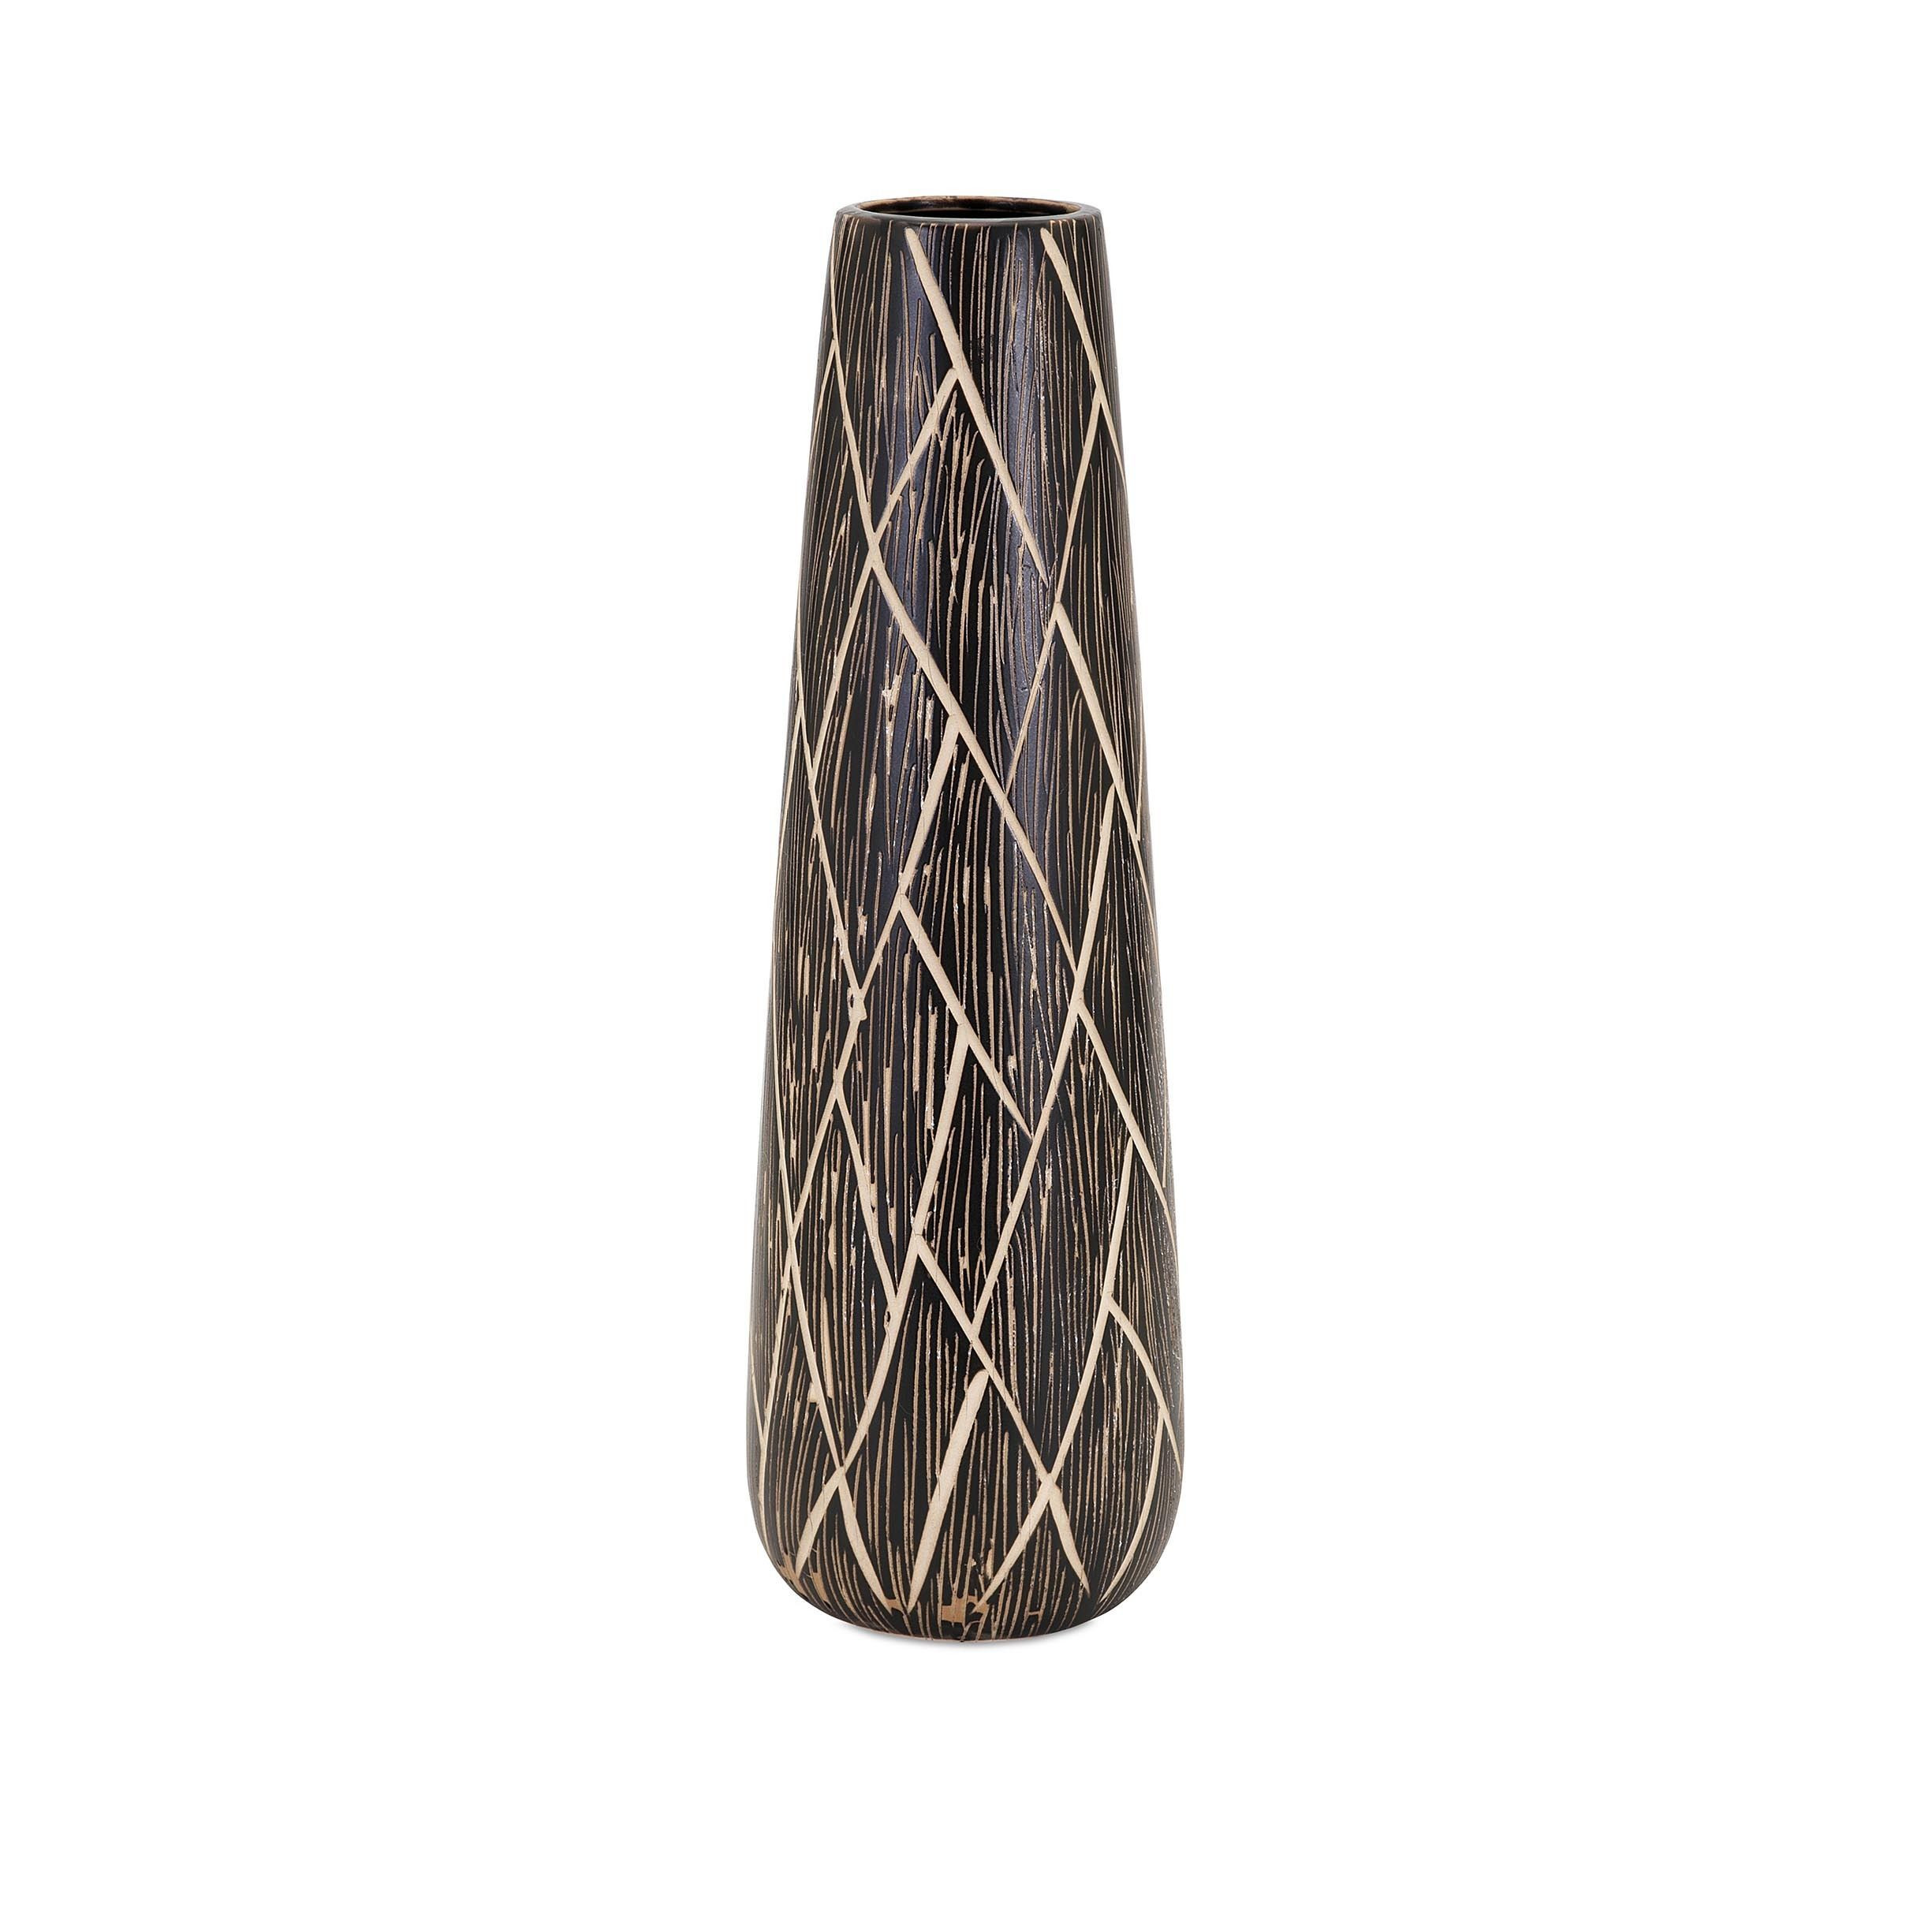 22 Great Brown Bamboo Vase 2024 free download brown bamboo vase of imax cayman small vase small brown ceramic outlet store regarding imax cayman small vase small brown ceramic